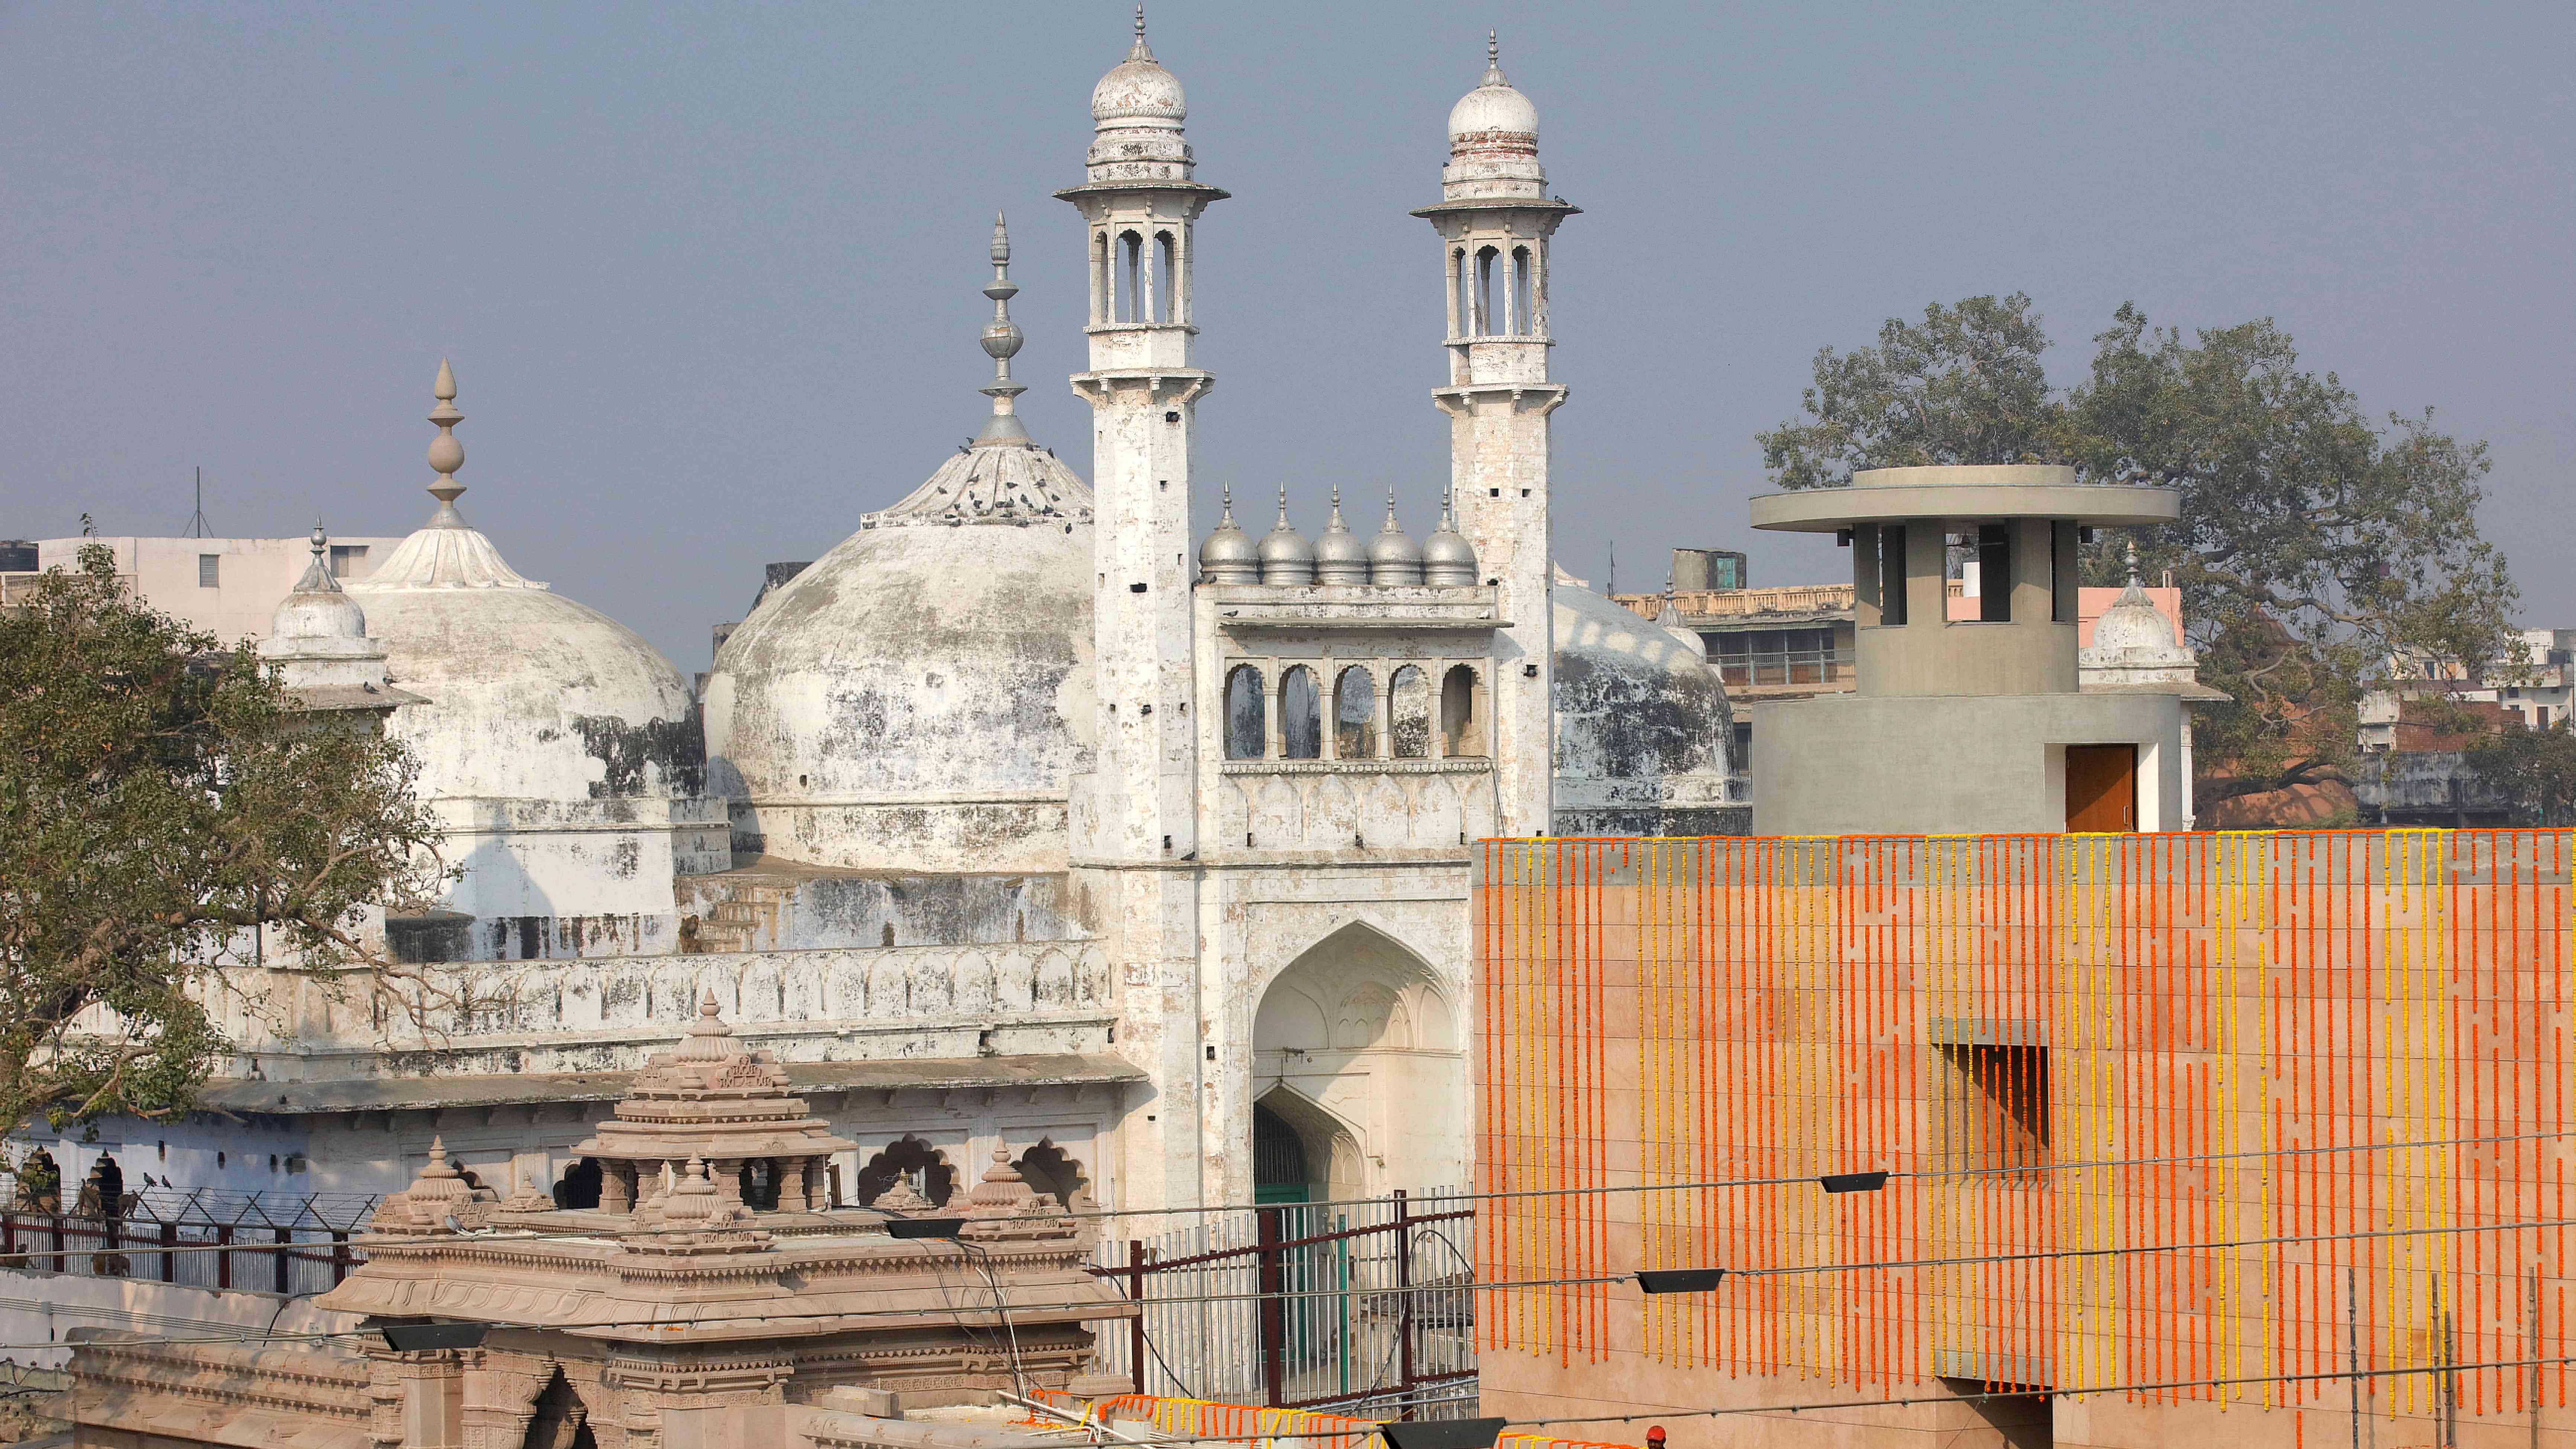  A worker stands on a temple rooftop adjacent to the Gyanvapi Mosque. Credit: Reuters File Photo